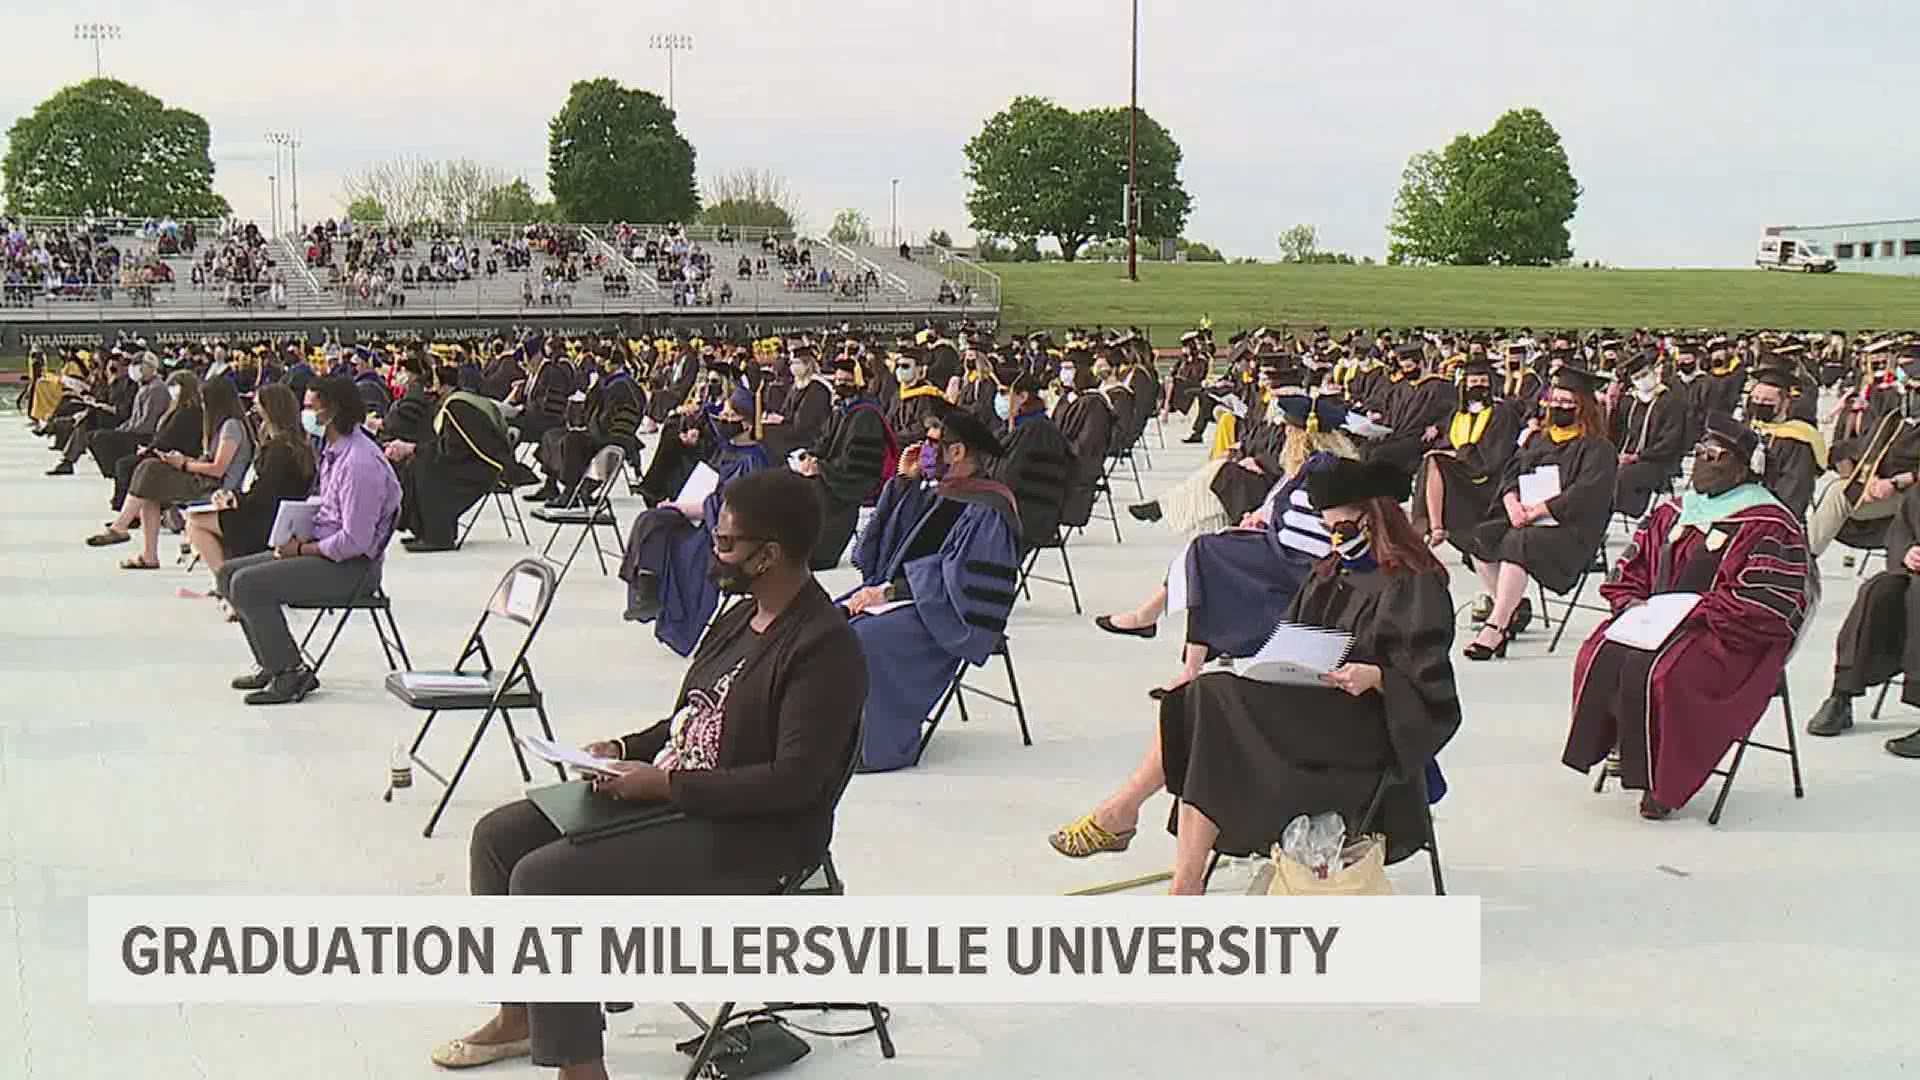 Millersville University held its commencement tonight in Lancaster County, for both this year's and last year's graduates.